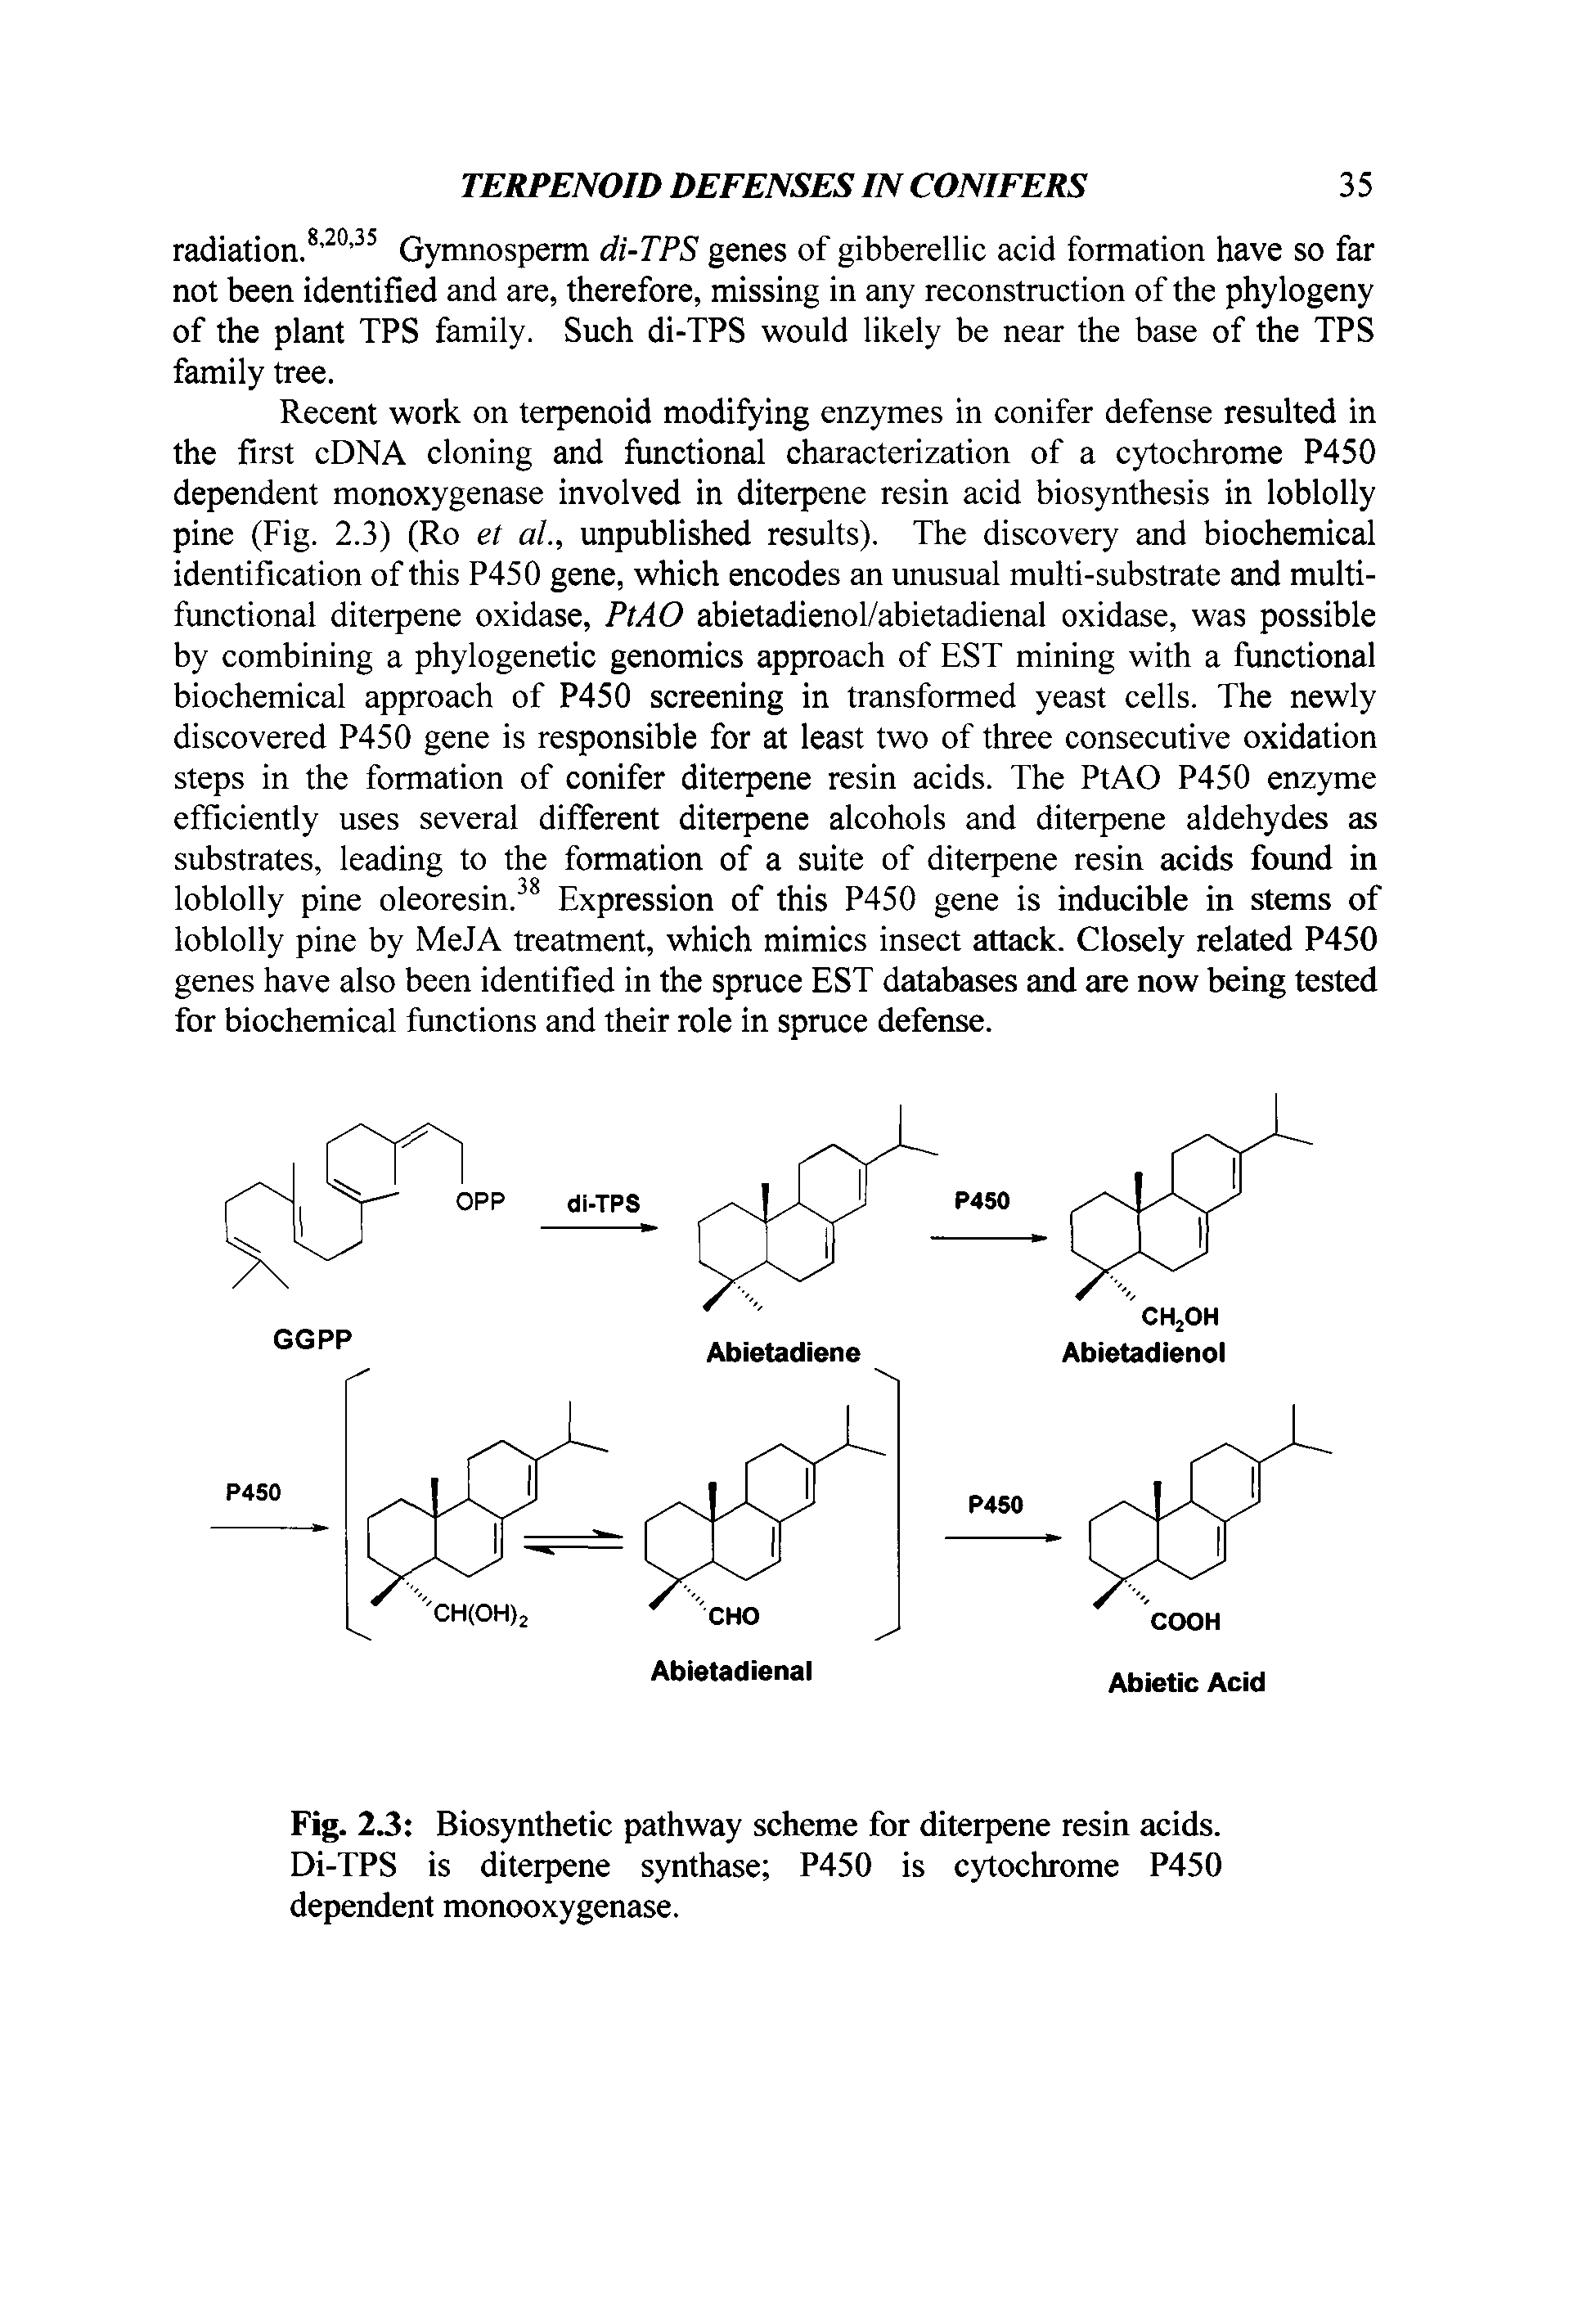 Fig. 2.3 Biosynthetic pathway scheme for diterpene resin acids. Di-TPS is diterpene synthase P450 is cytochrome P450 dependent monooxygenase.